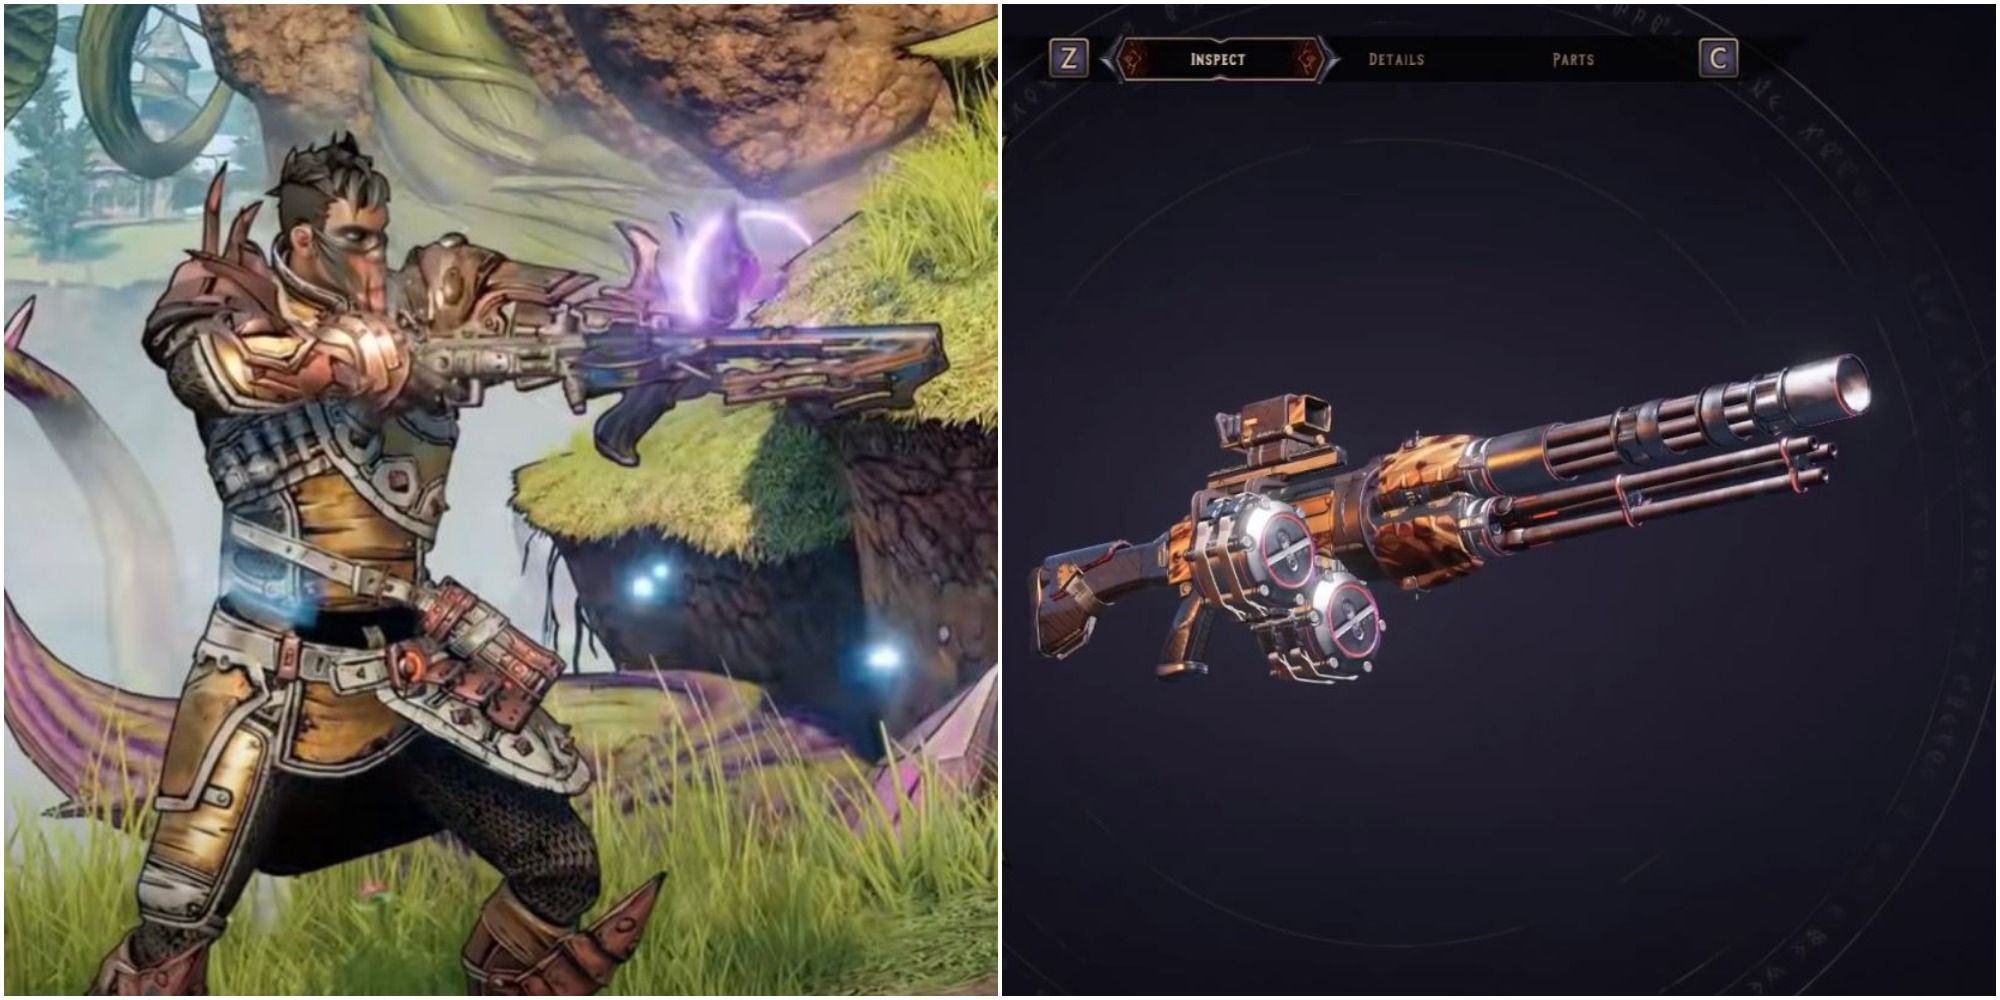 Split image of player firing a weapon in Tangledrift and the Manual Tranmission assault rifle